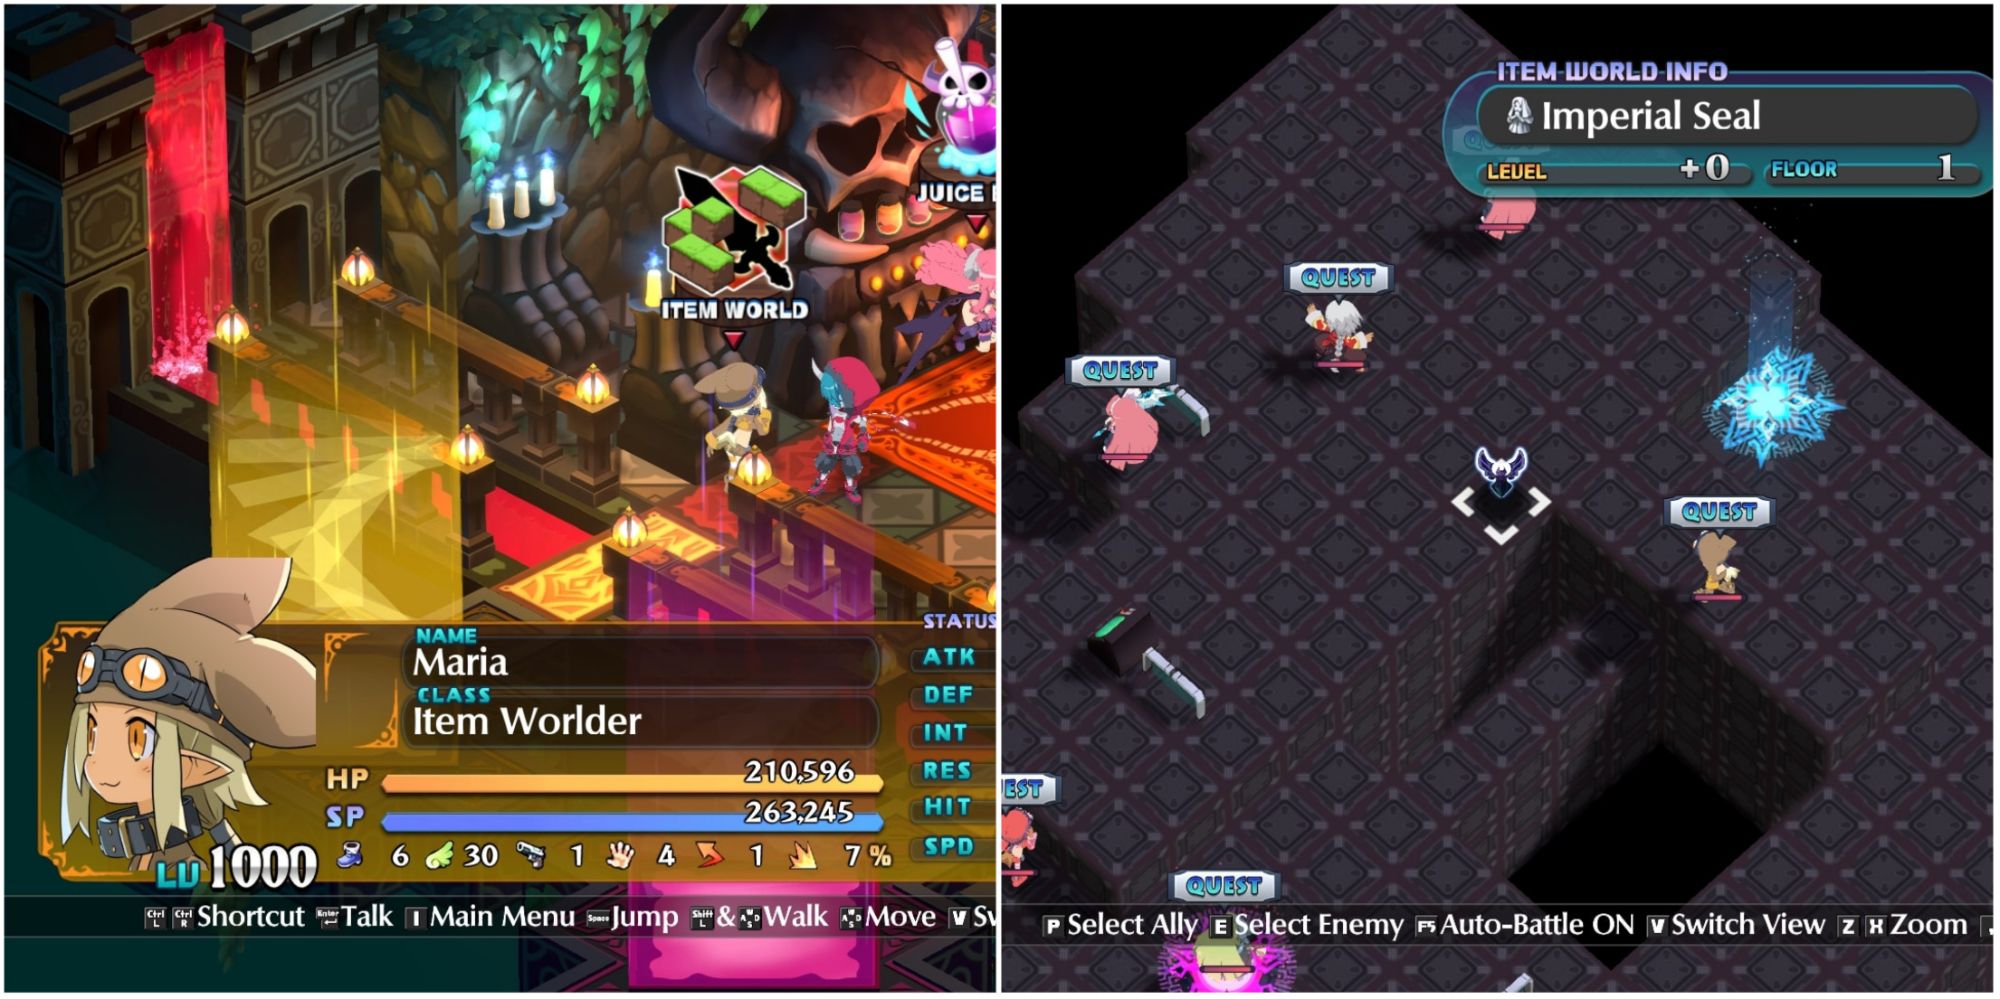 Disgaea 6 - collage of item worlder and the item world